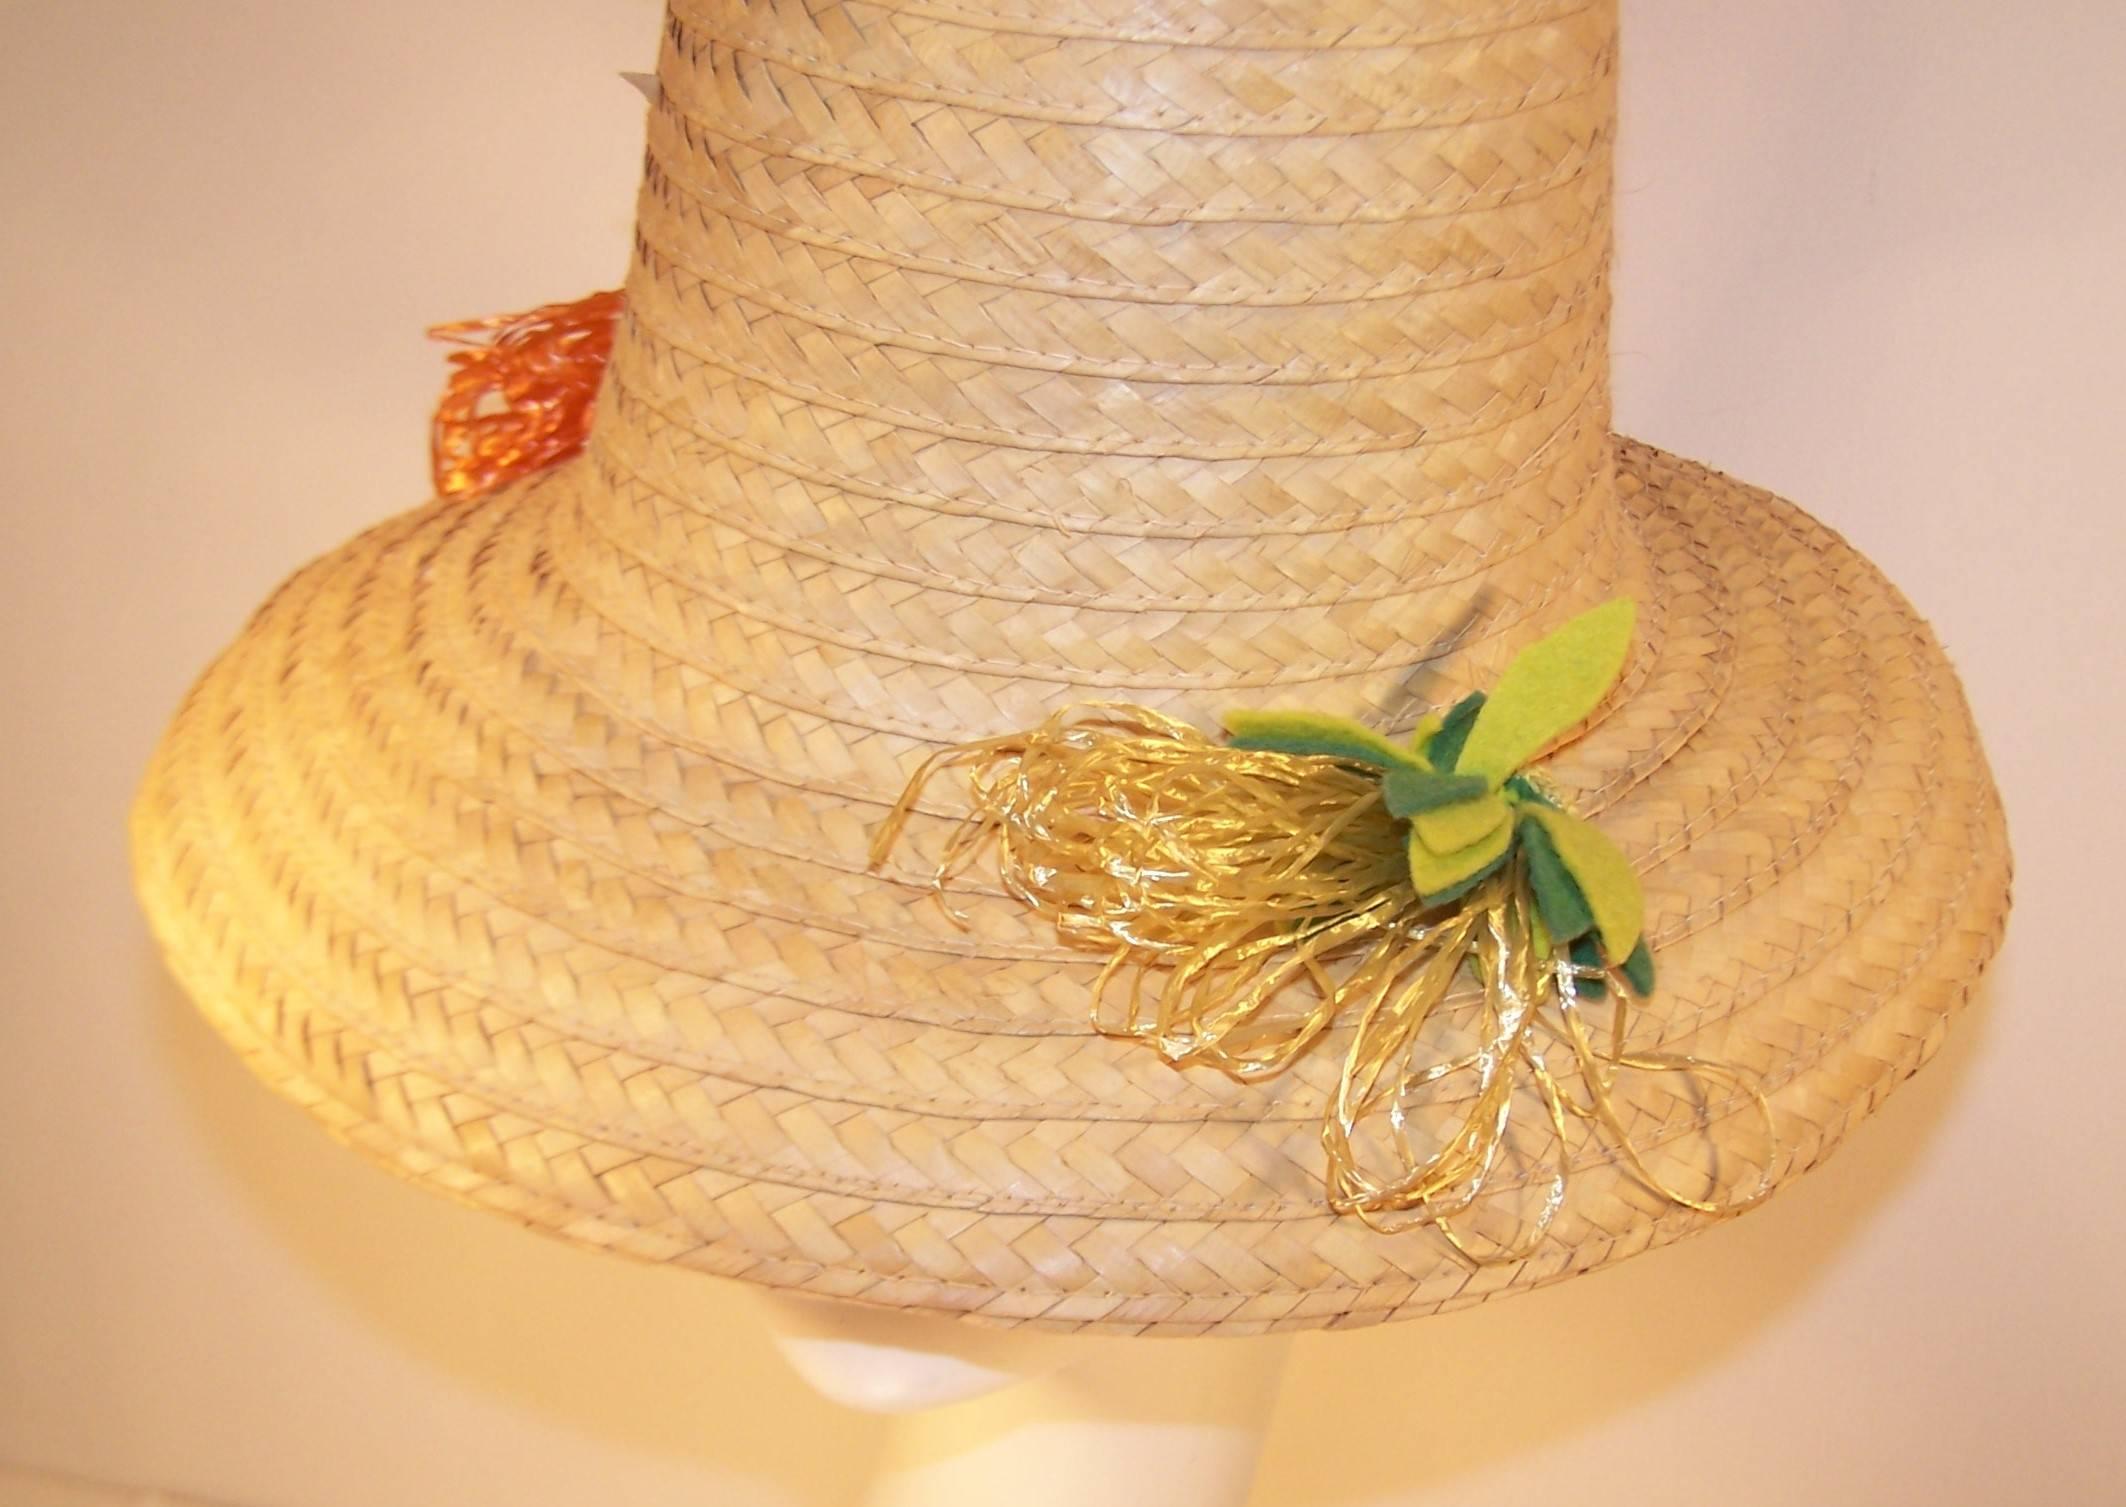 Whimsical 1950's Conical Novelty Straw Beach Hat 2